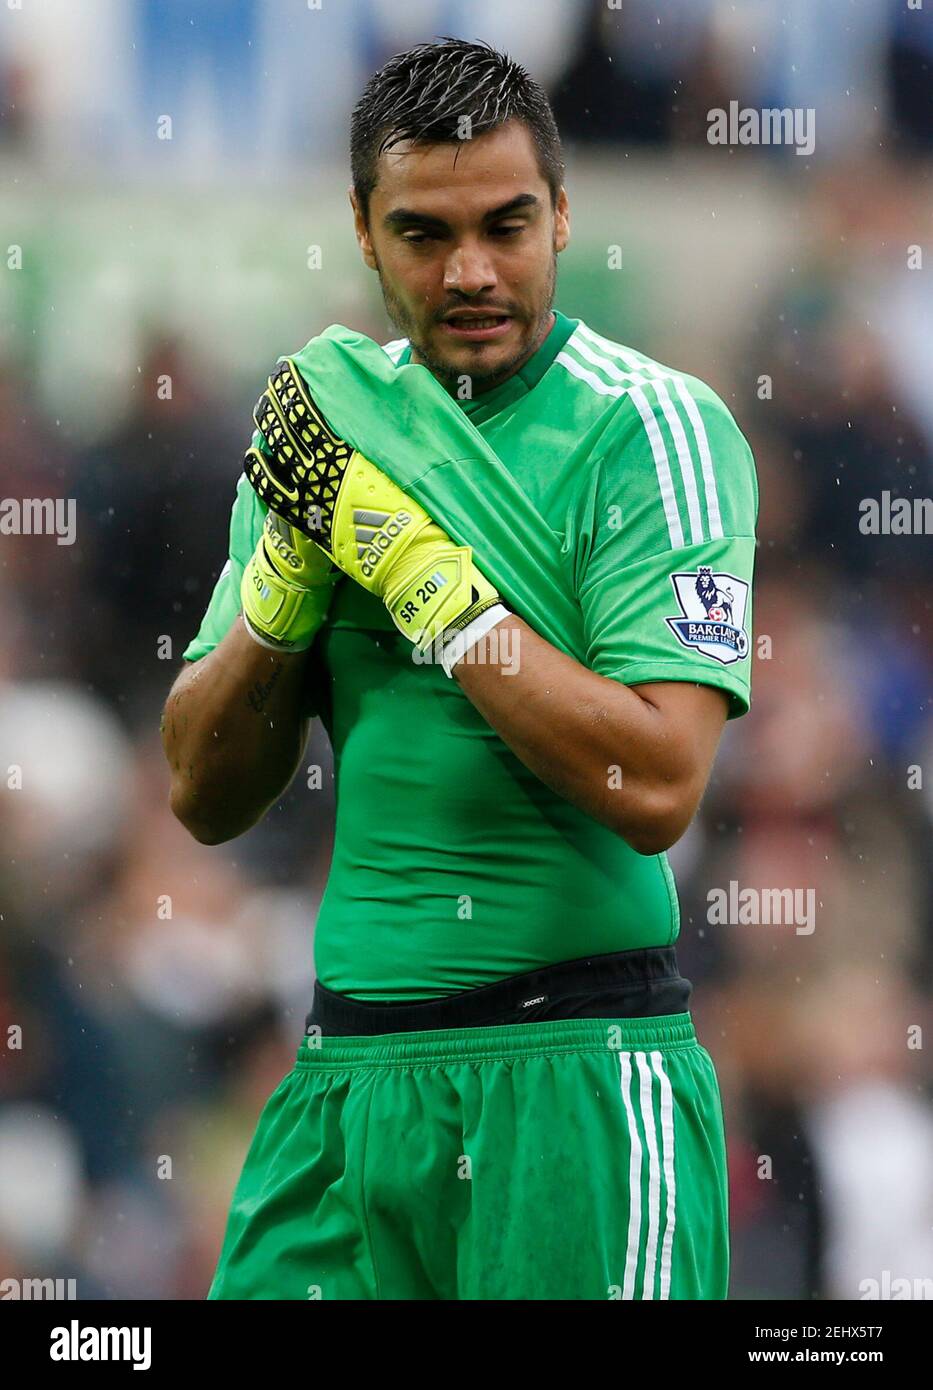 Football - Swansea City v Manchester United - Barclays Premier League - Liberty Stadium - 30/8/15 Manchester United's Sergio Romero Action Images via Reuters / John Sibley Livepic EDITORIAL USE ONLY. No use with unauthorized audio, video, data, fixture lists, club/league logos or 'live' services. Online in-match use limited to 45 images, no video emulation. No use in betting, games or single club/league/player publications.  Please contact your account representative for further details. Stock Photo